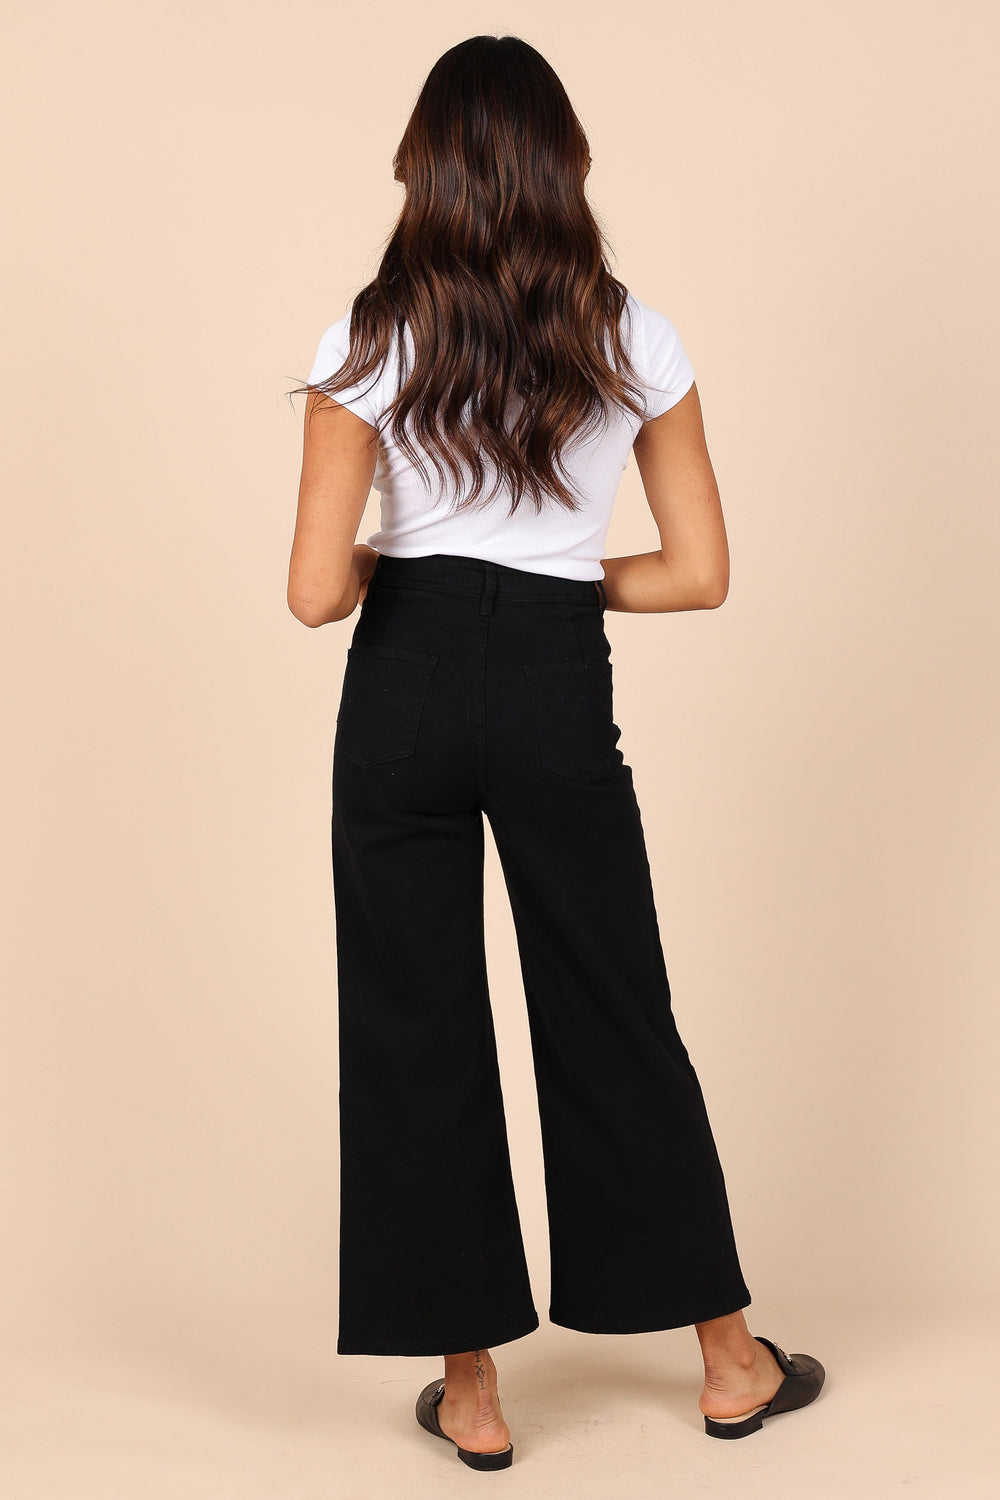 Women High Waisted Pants, Wide Leg Pants, Formal Pants, White Pants,  Official Meeting Trousers -  New Zealand